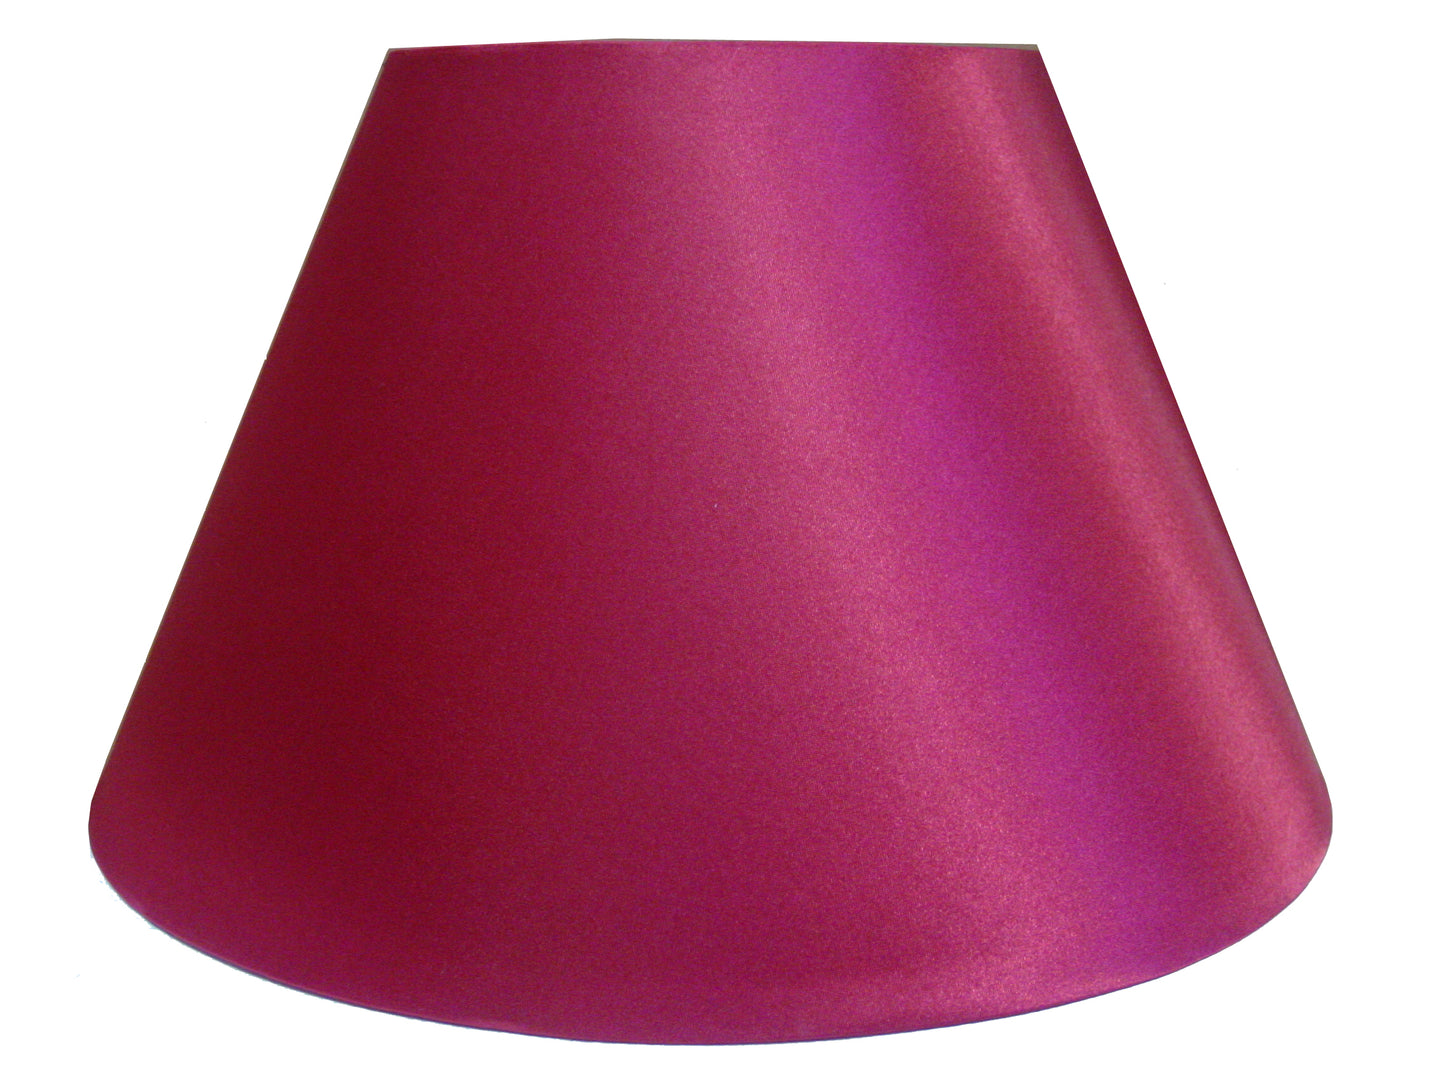 12" Empire Pendant Ceiling Table Lamp Shade Black Cream Pink Red Teal White Grey